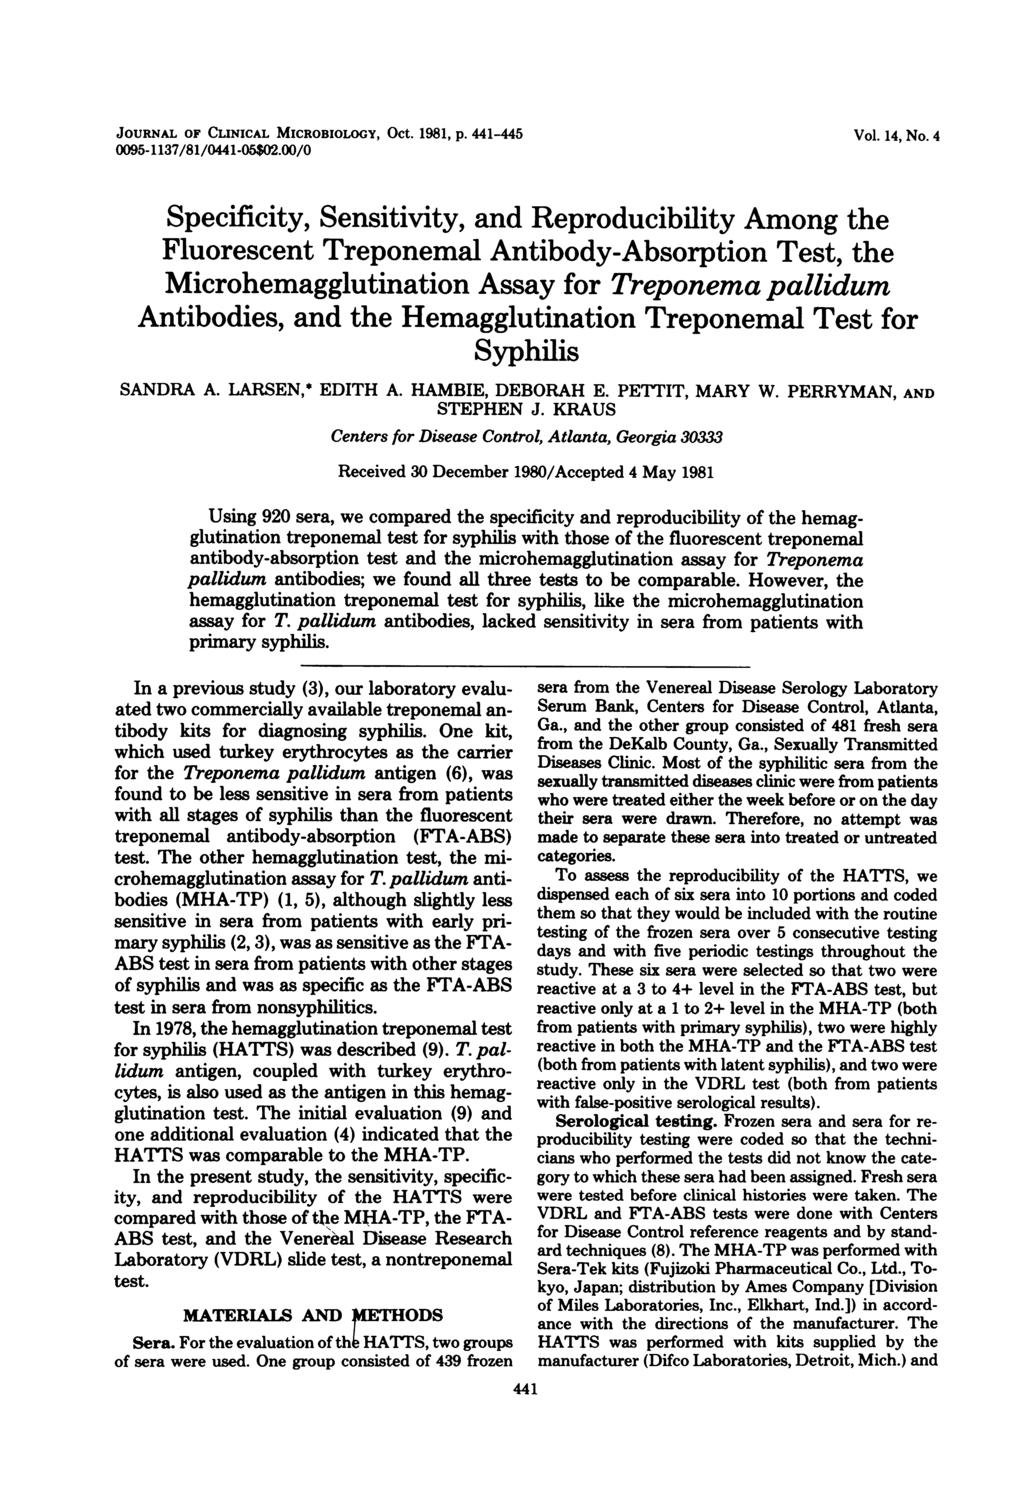 JOURNAL OF CLINICAL MICROBIOLOGY, Oct. 1981, p. 441-445 0095-1137/81/0441-05$02.00/0 Vol. 14, No.